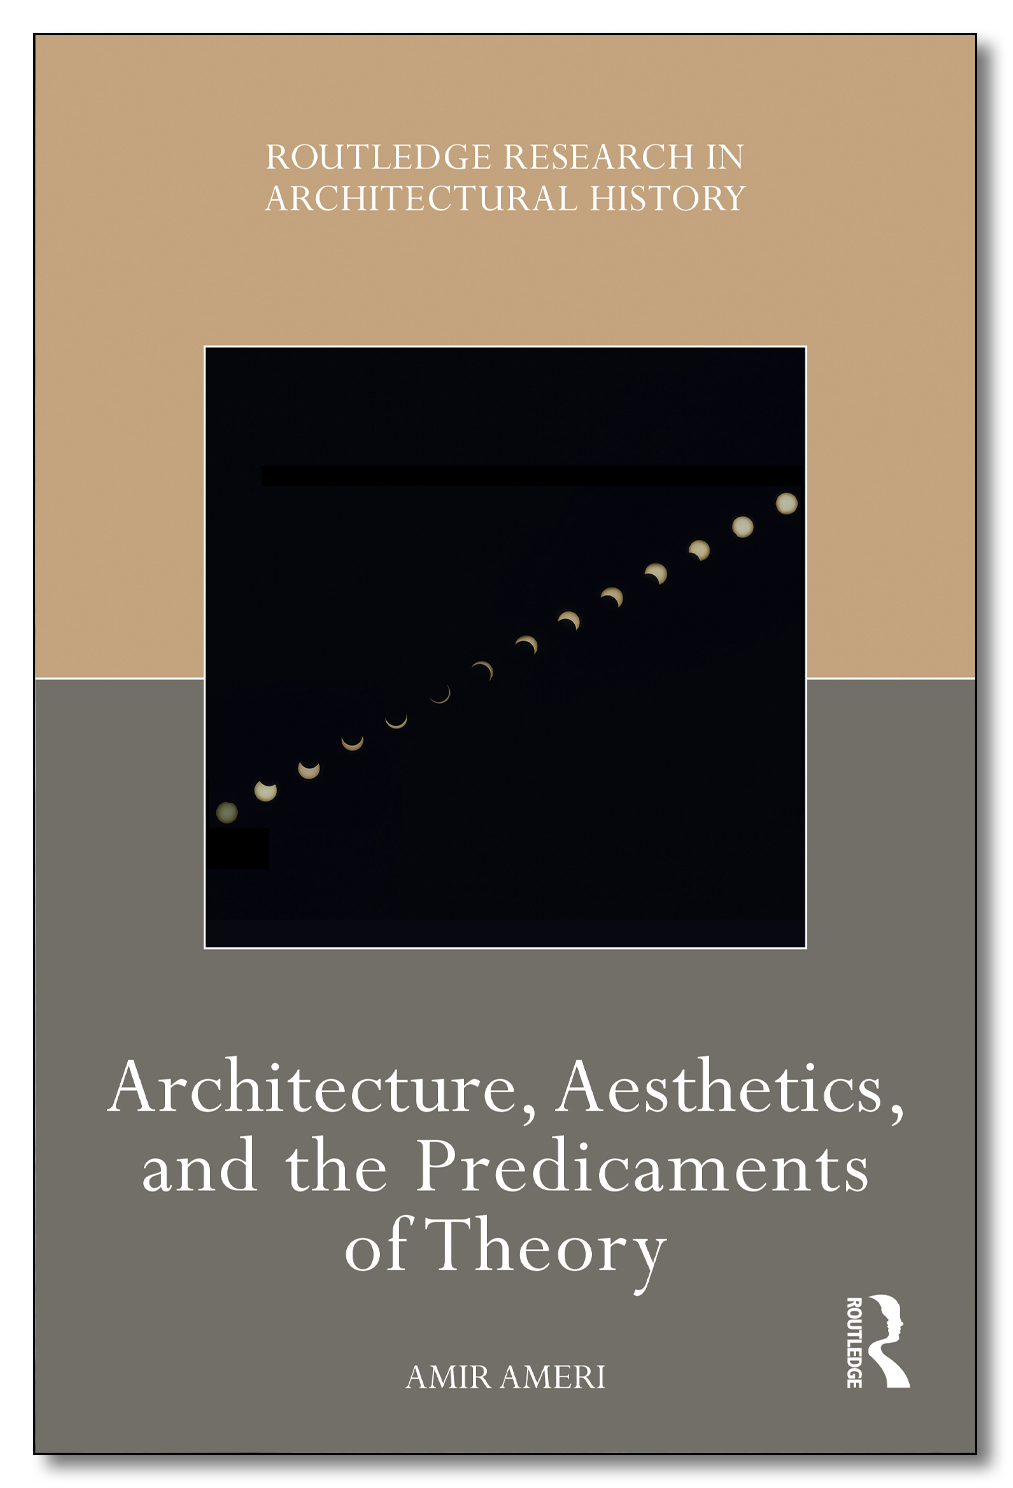 Architecture, Aesthetics, and the Predicaments of Theory book cover